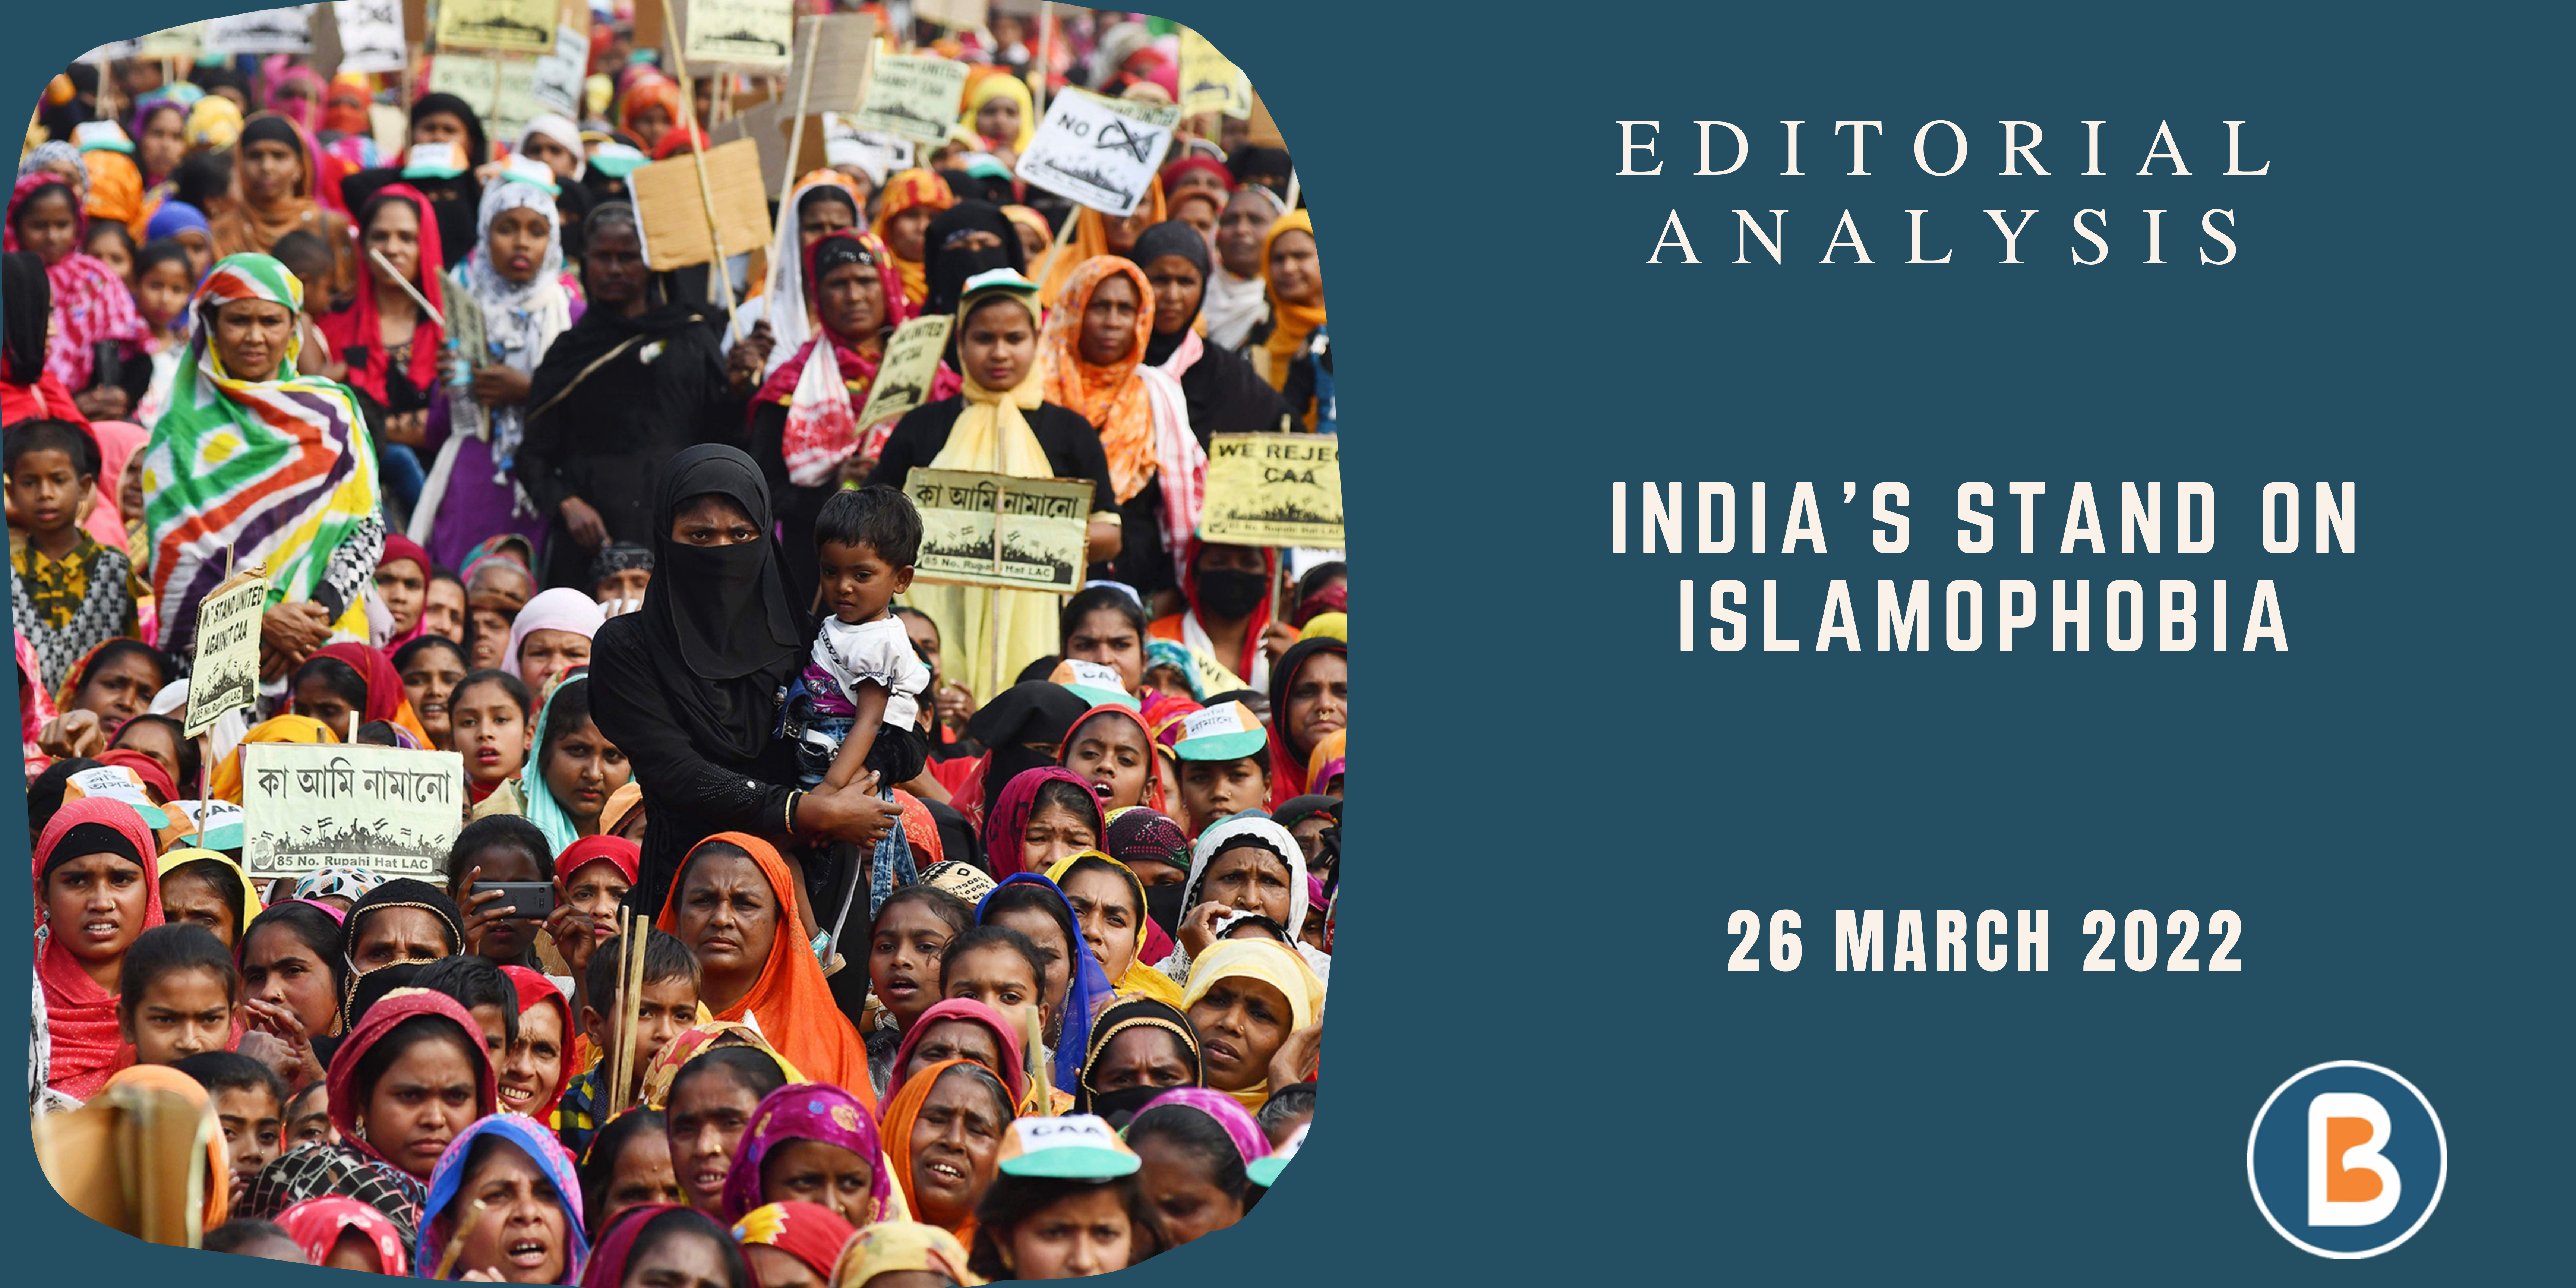 Editorial Analysis for UPSC - India’s Stand on Islamophobia